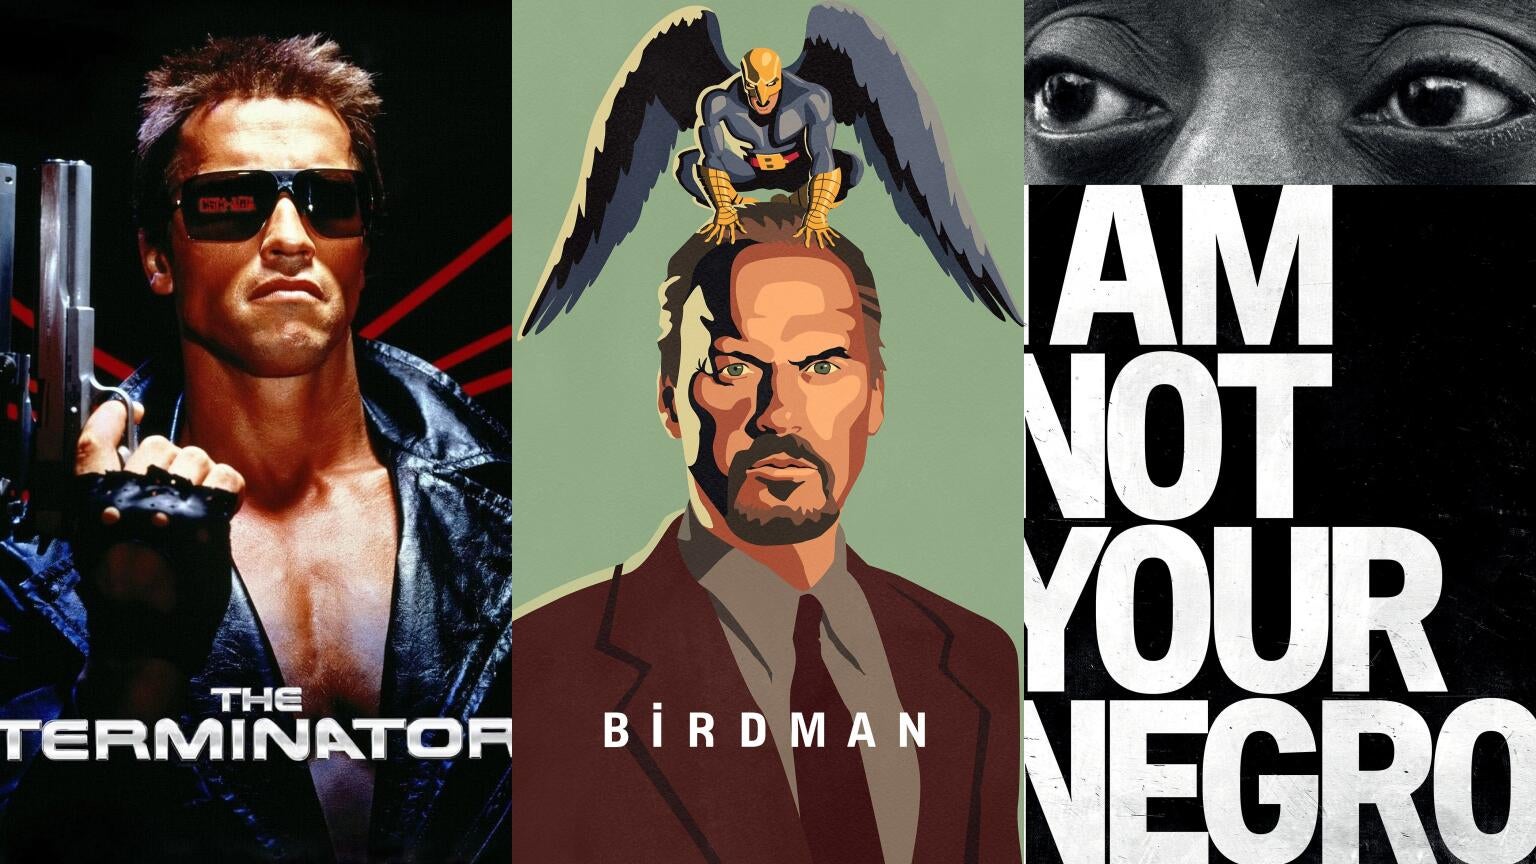 Movie posters for "The Terminator," "Birdman," and "I Am Not Your Negro"